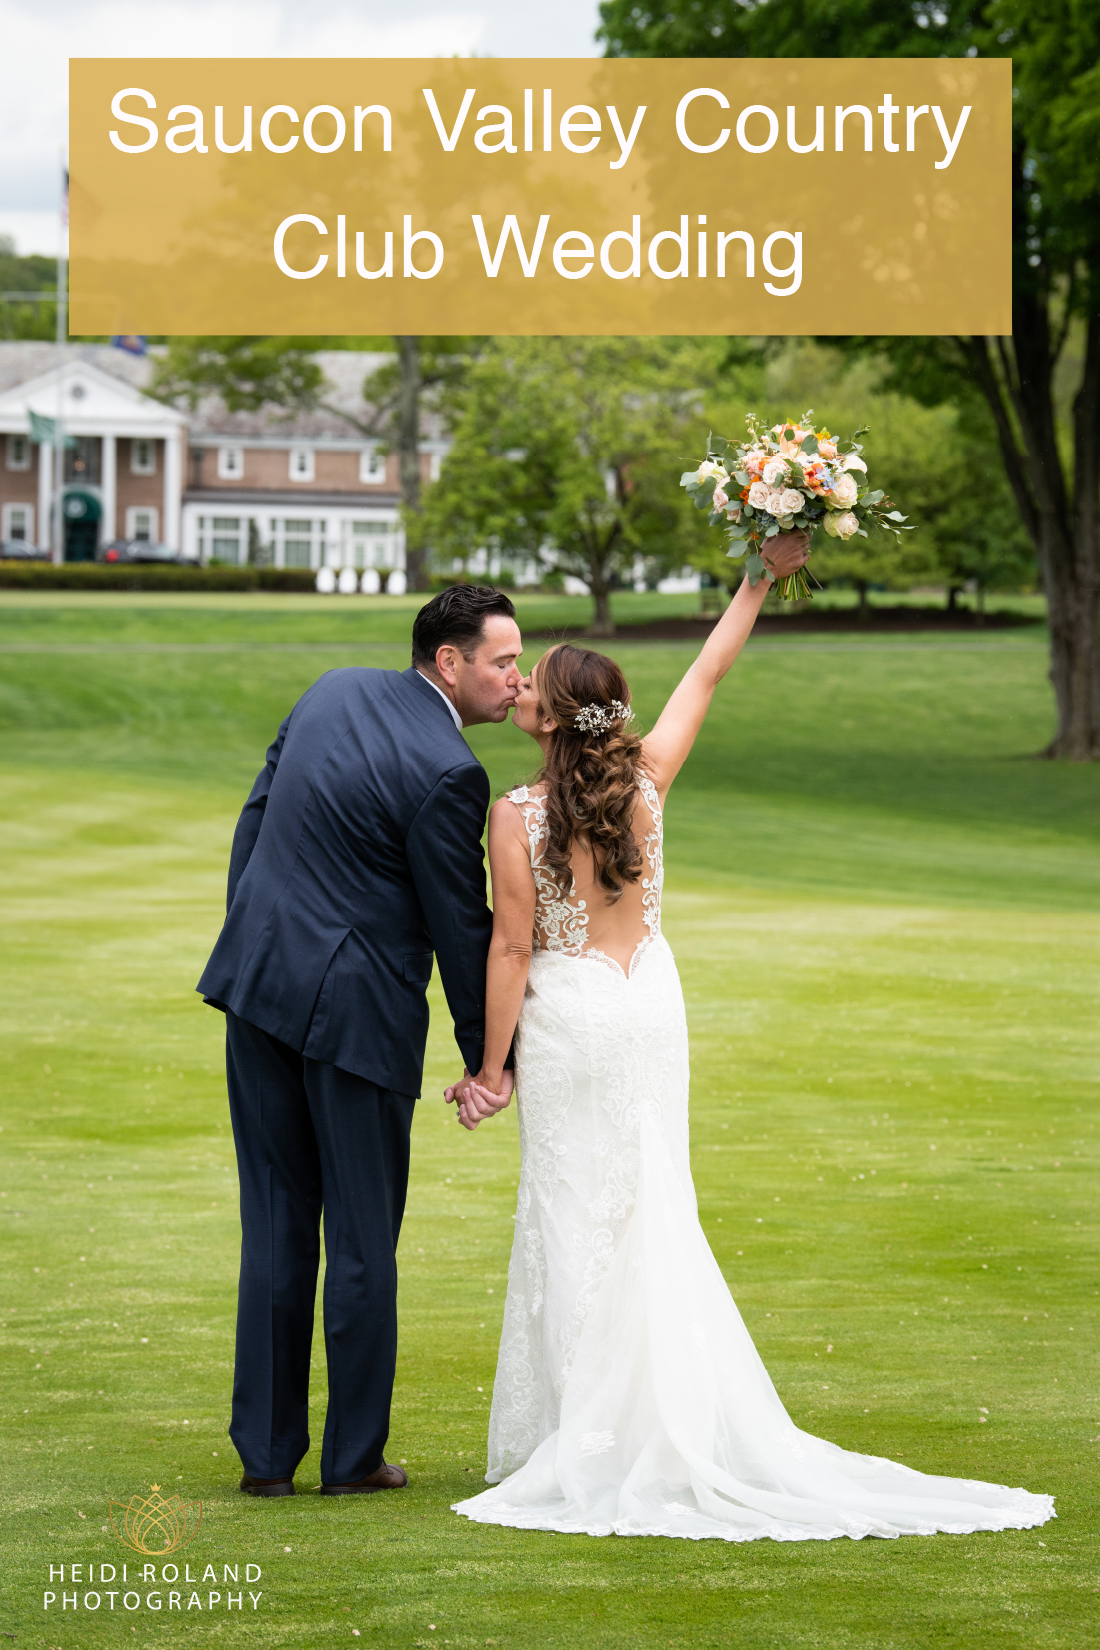  Saucon Valley Country Club wedding